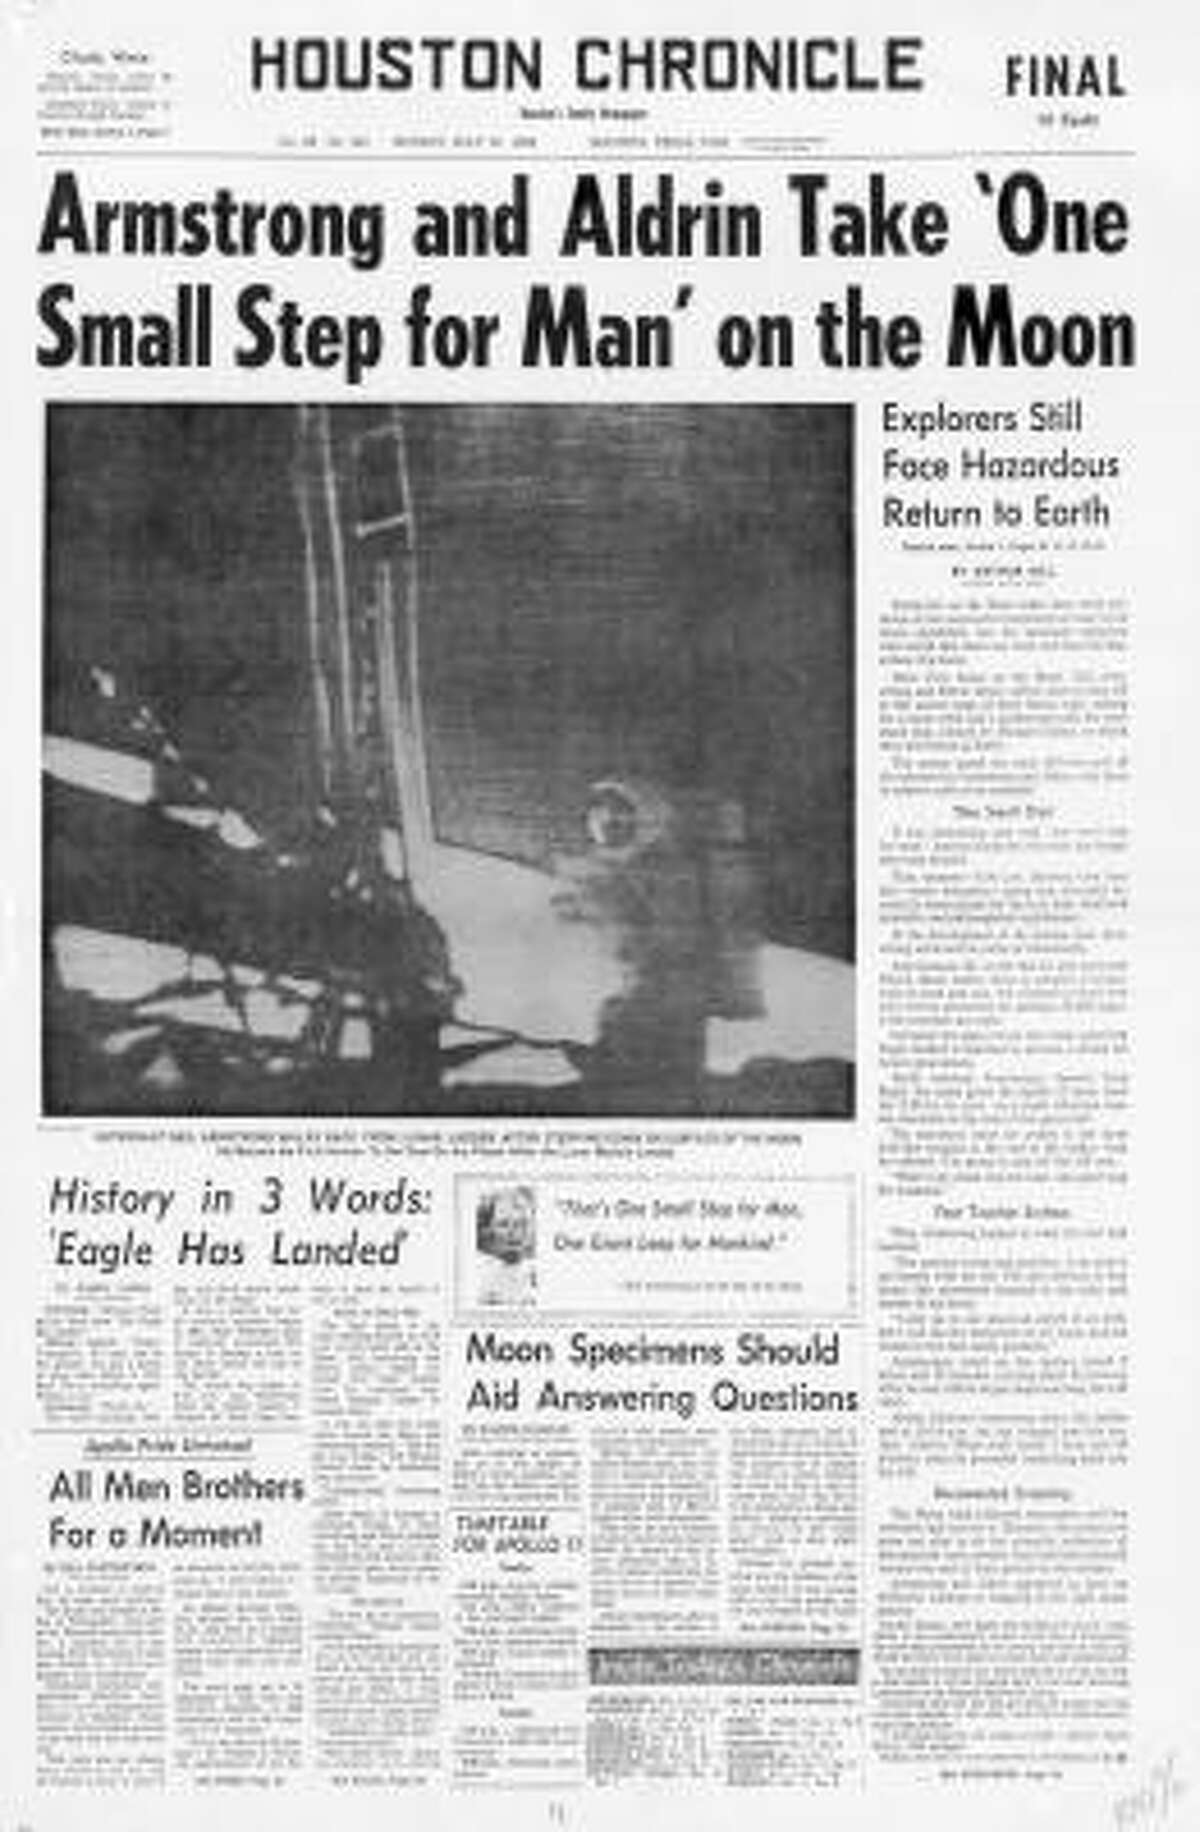 On July 21, 1969, Neil Armstrong and Buzz Aldrin ''Take One Small Step for Man'' on the Moon.